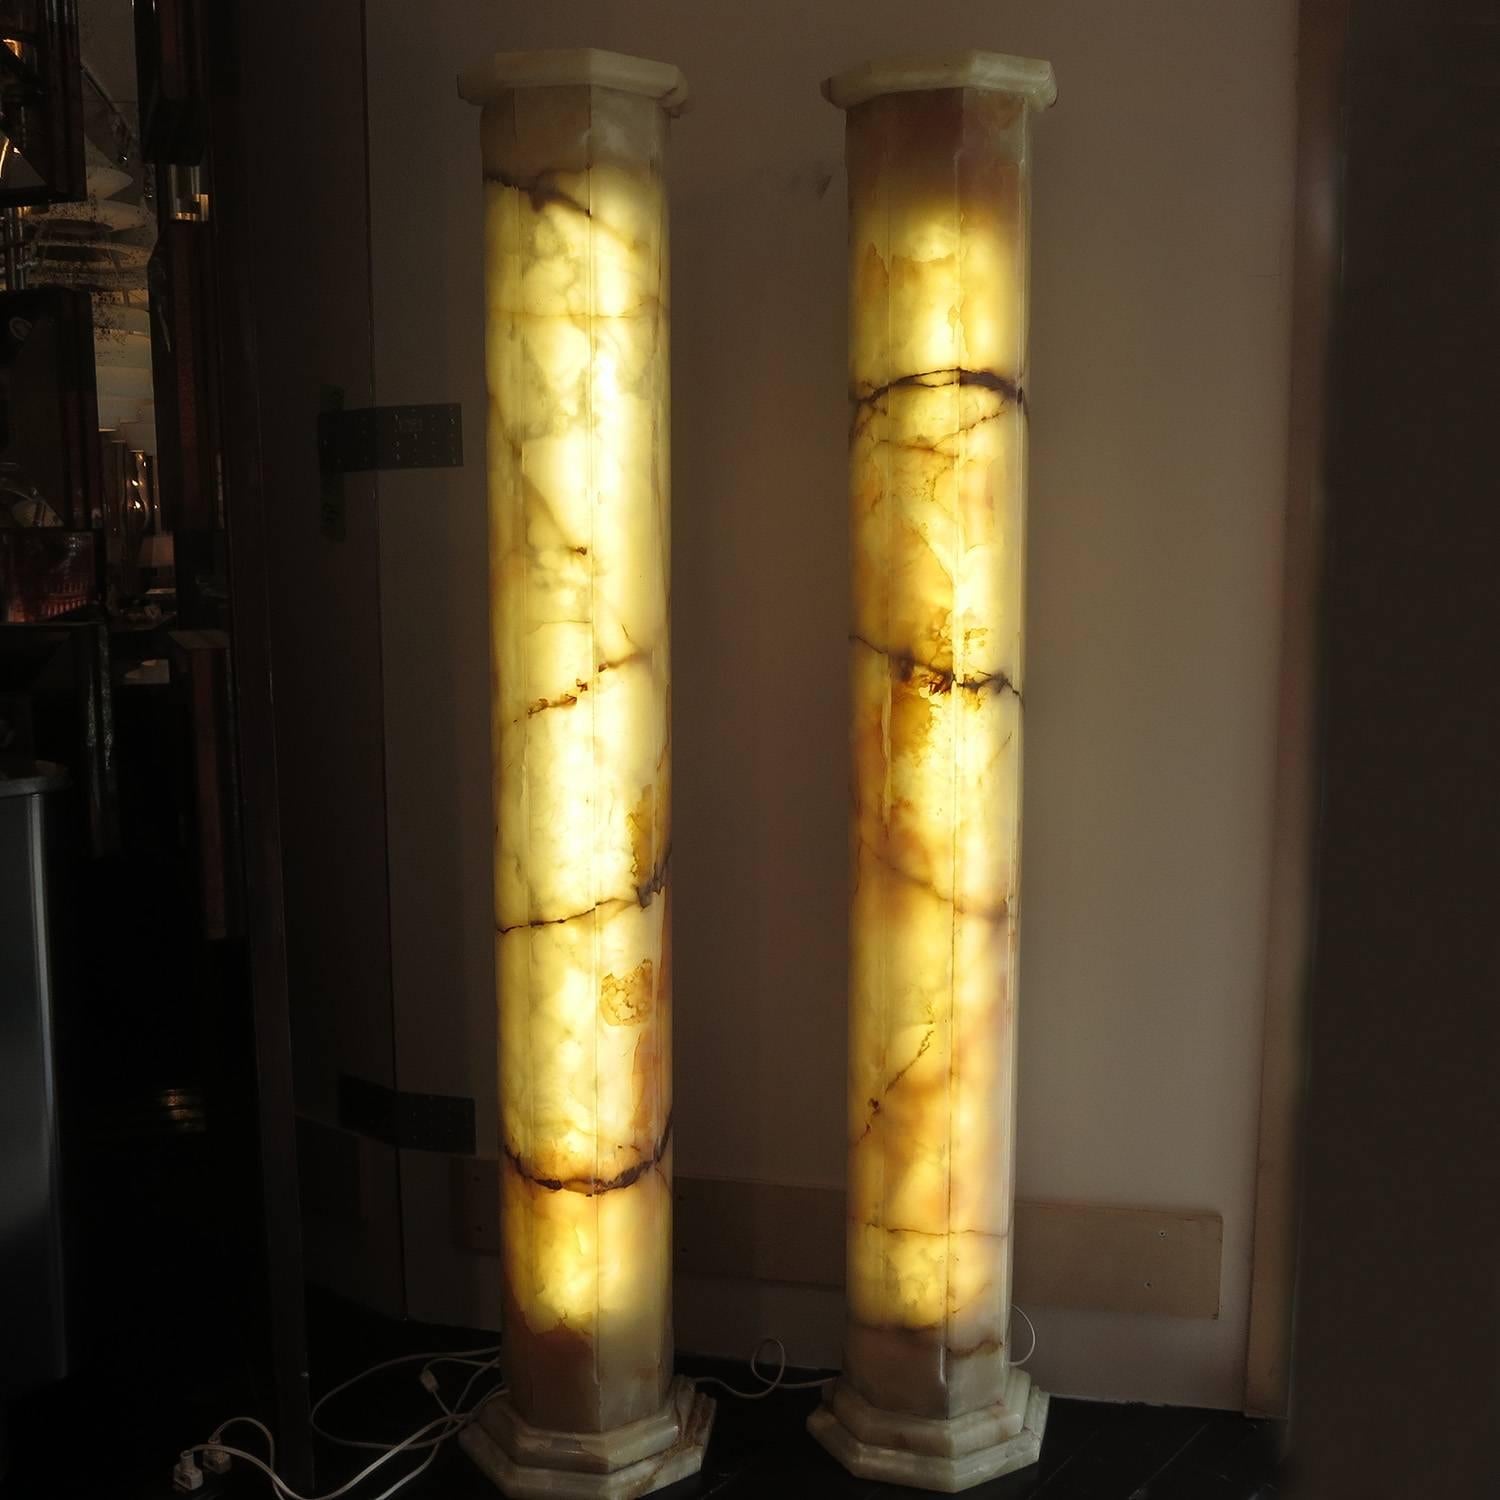 RETIREMENT SALE!!!  EVERYTHING MUST GO - CHECK OUT OUR OTHER ITEMS.

These great decorative columns look fantastic either lighted or not. Both columns are hollow and house a fluorescent tube in each. The backs are flat to place against a wall. The